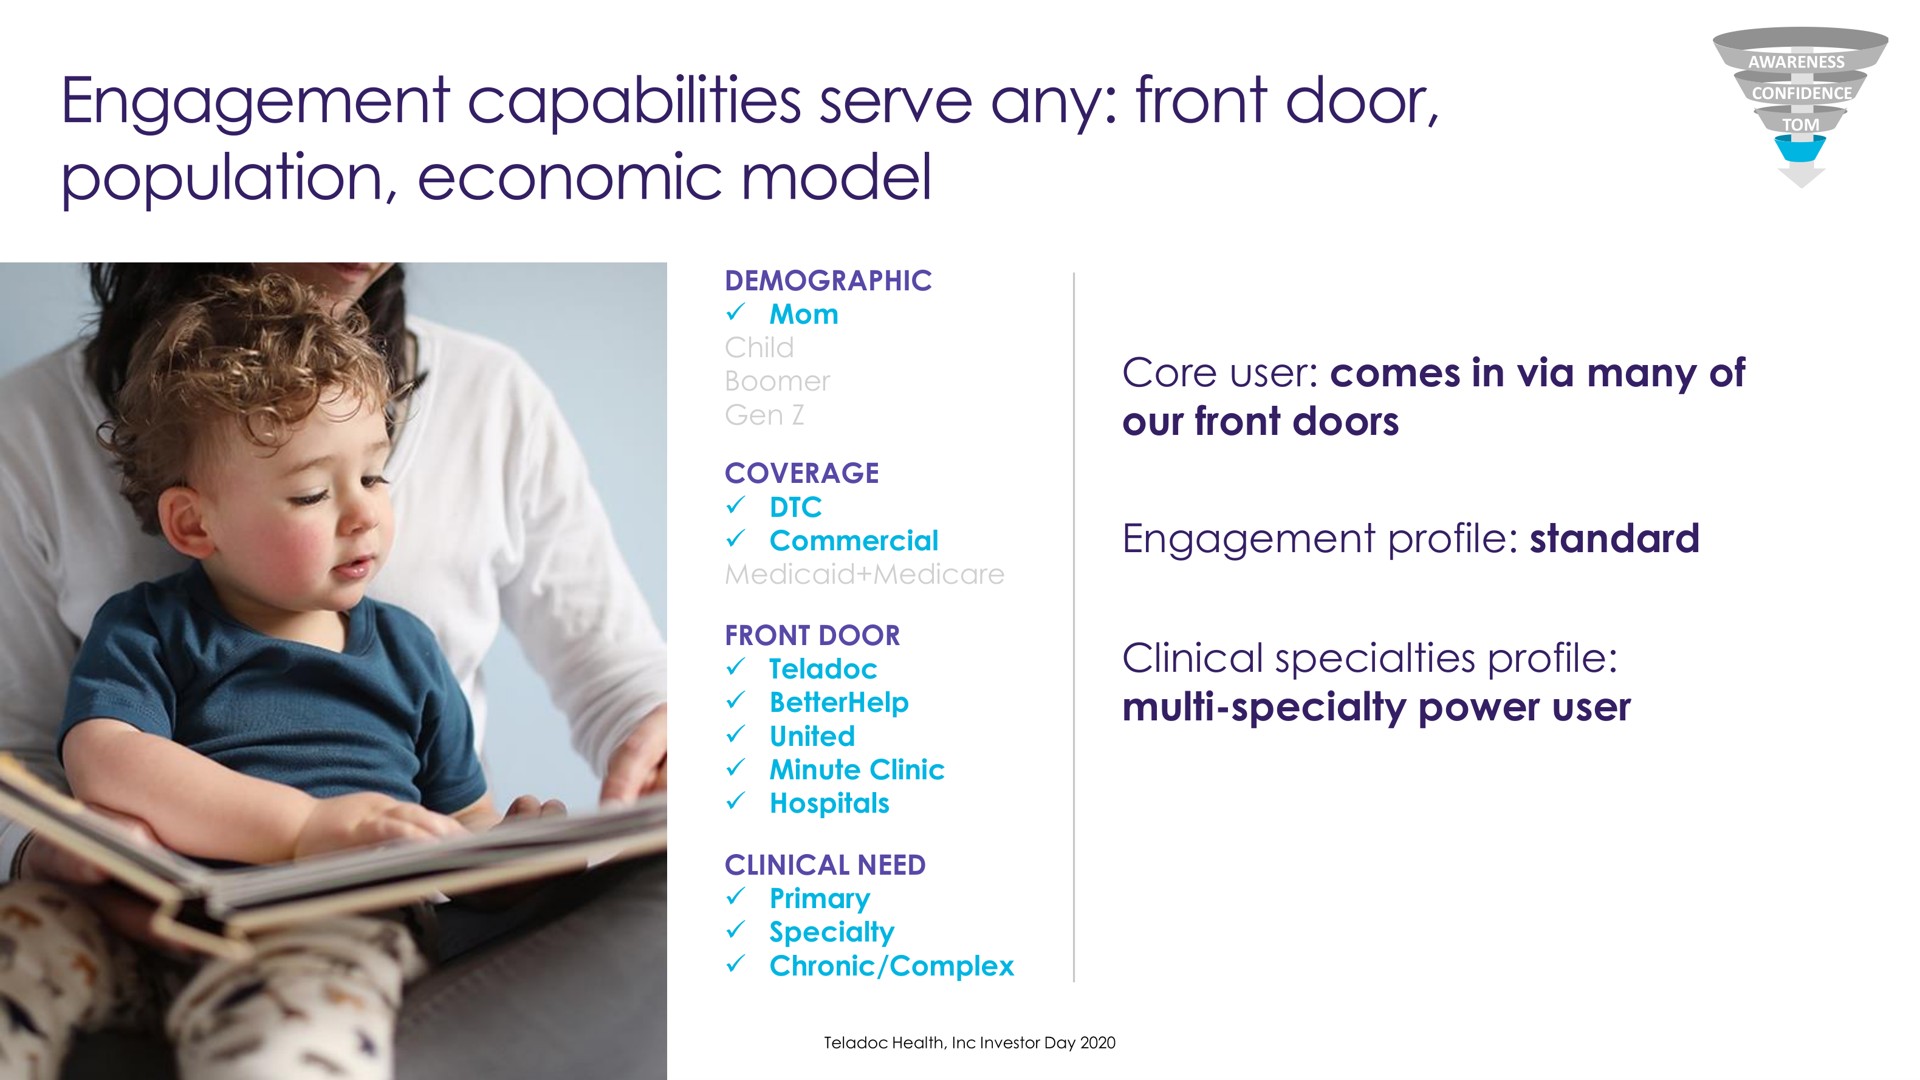 core user comes in via many of our front doors engagement profile standard clinical specialties profile specialty power user capabilities serve any population economic model door | Teladoc